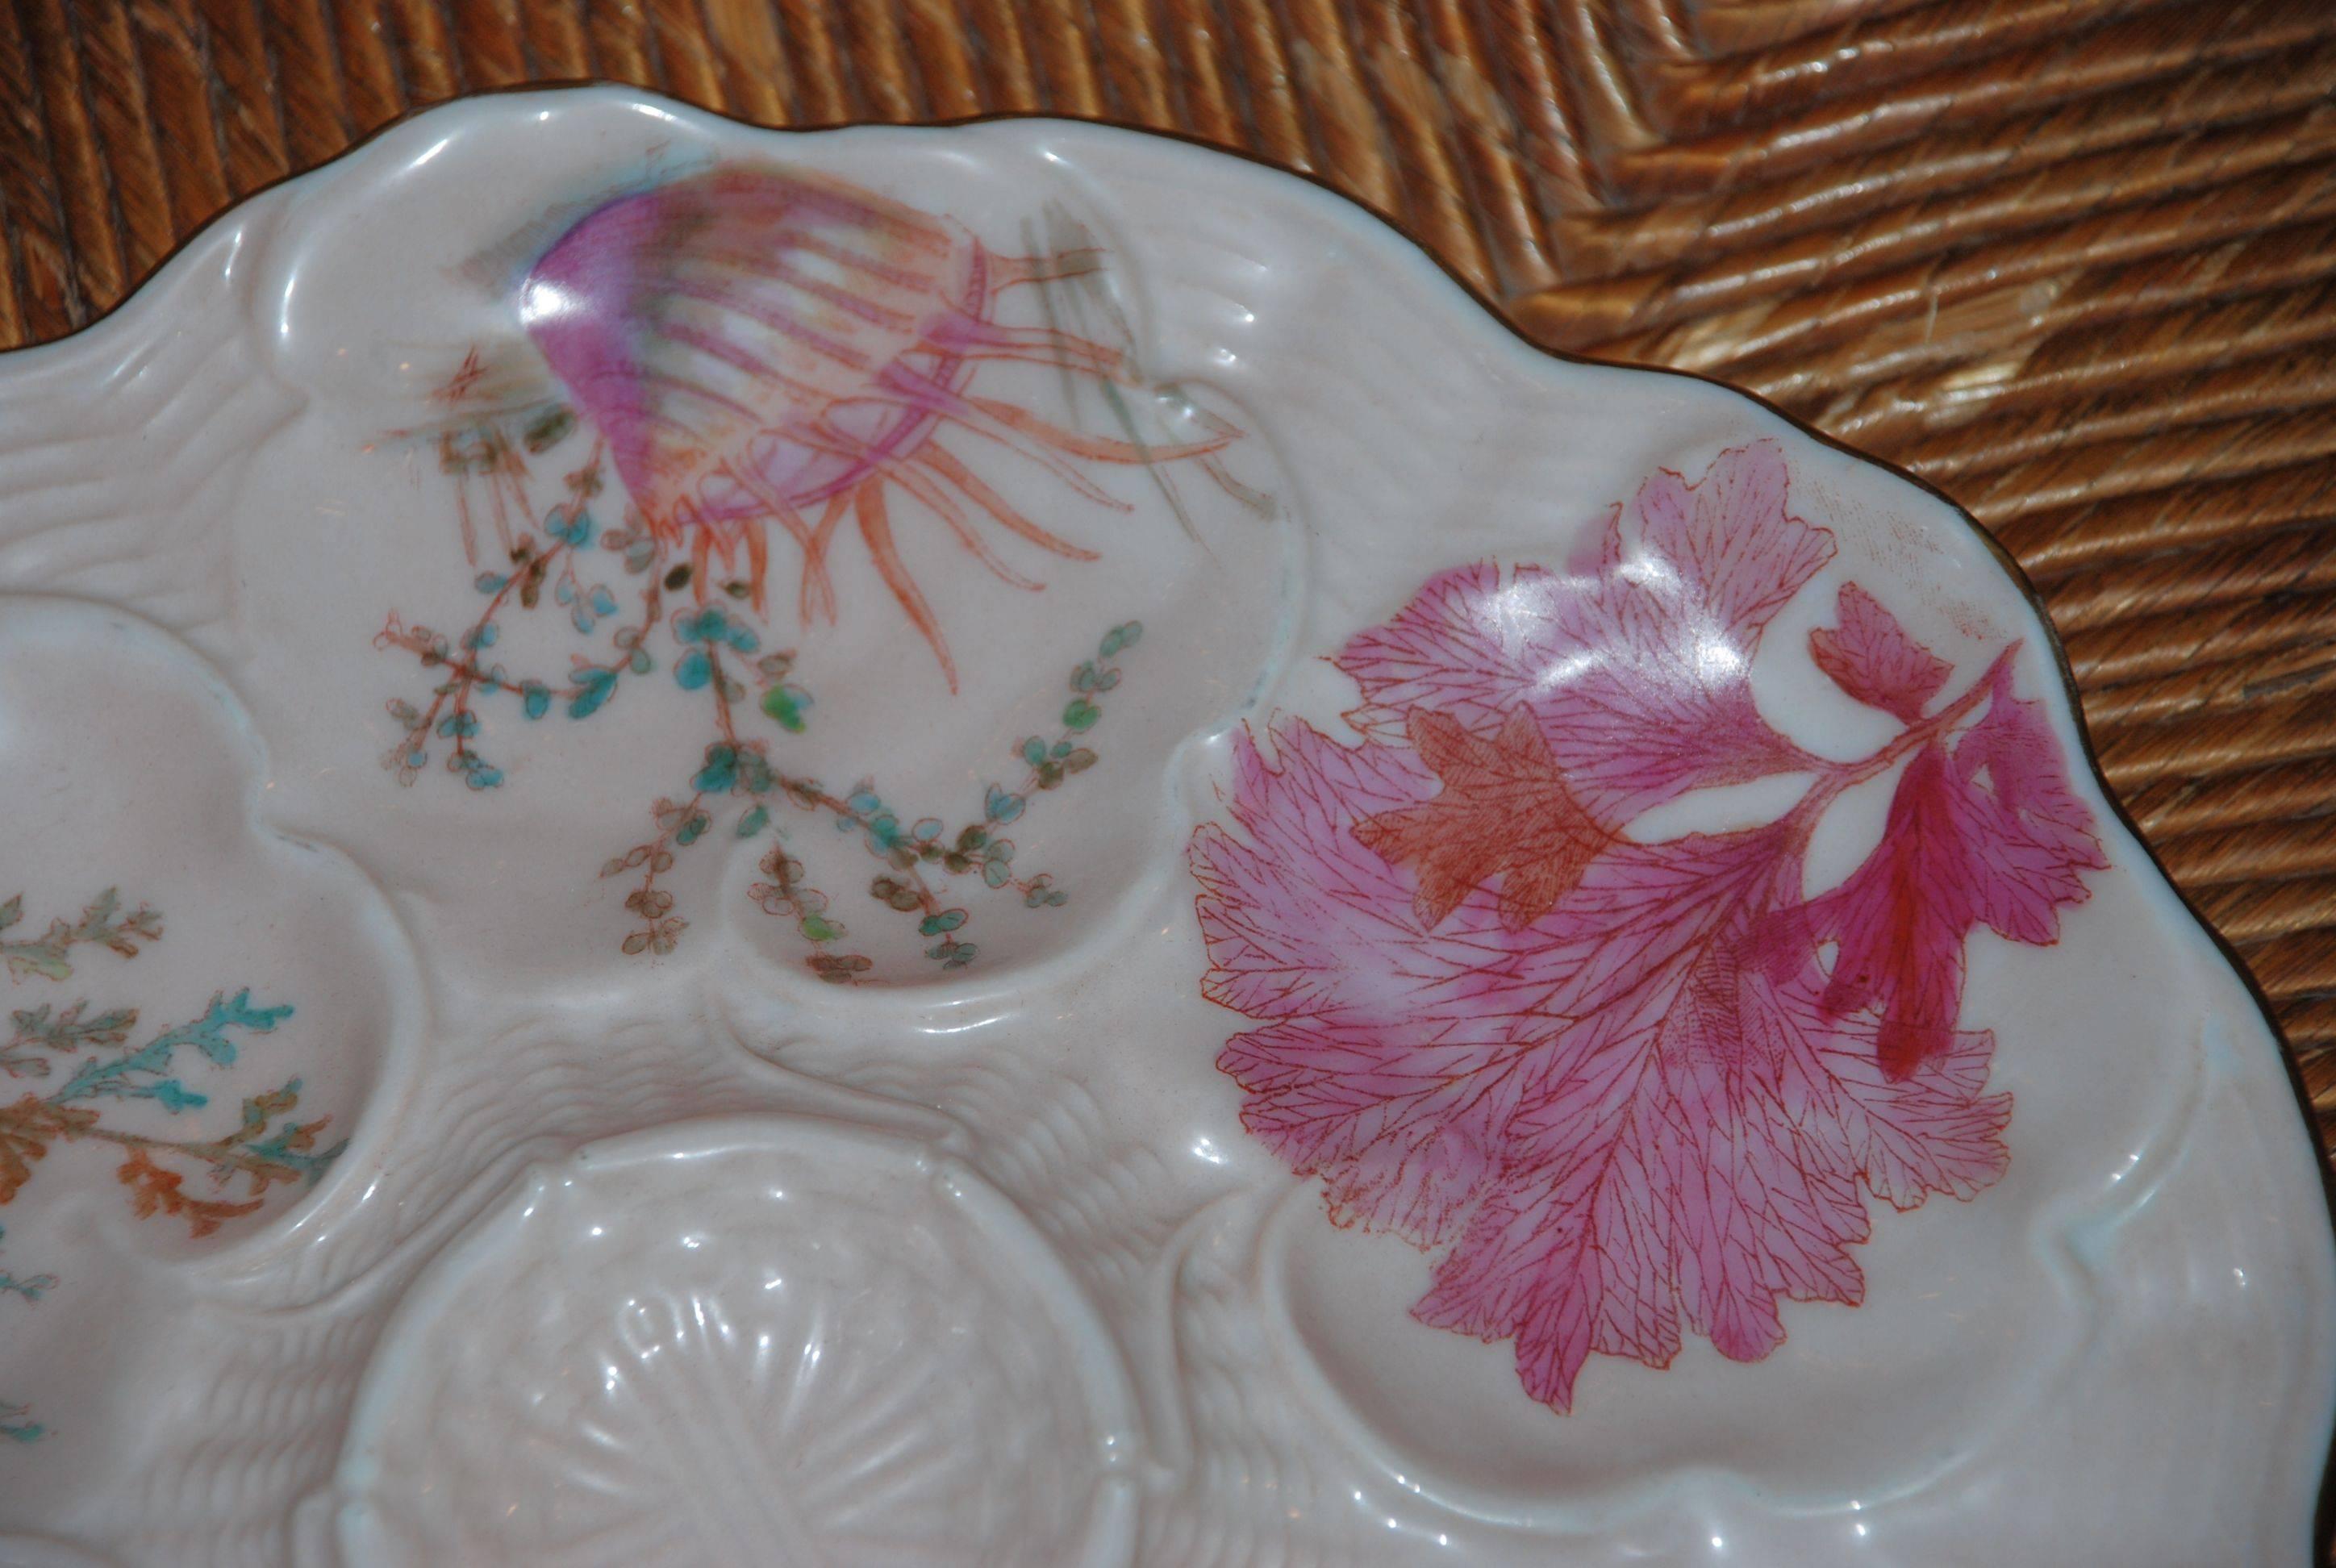 Antique hand-painted porcelain oyster plate.